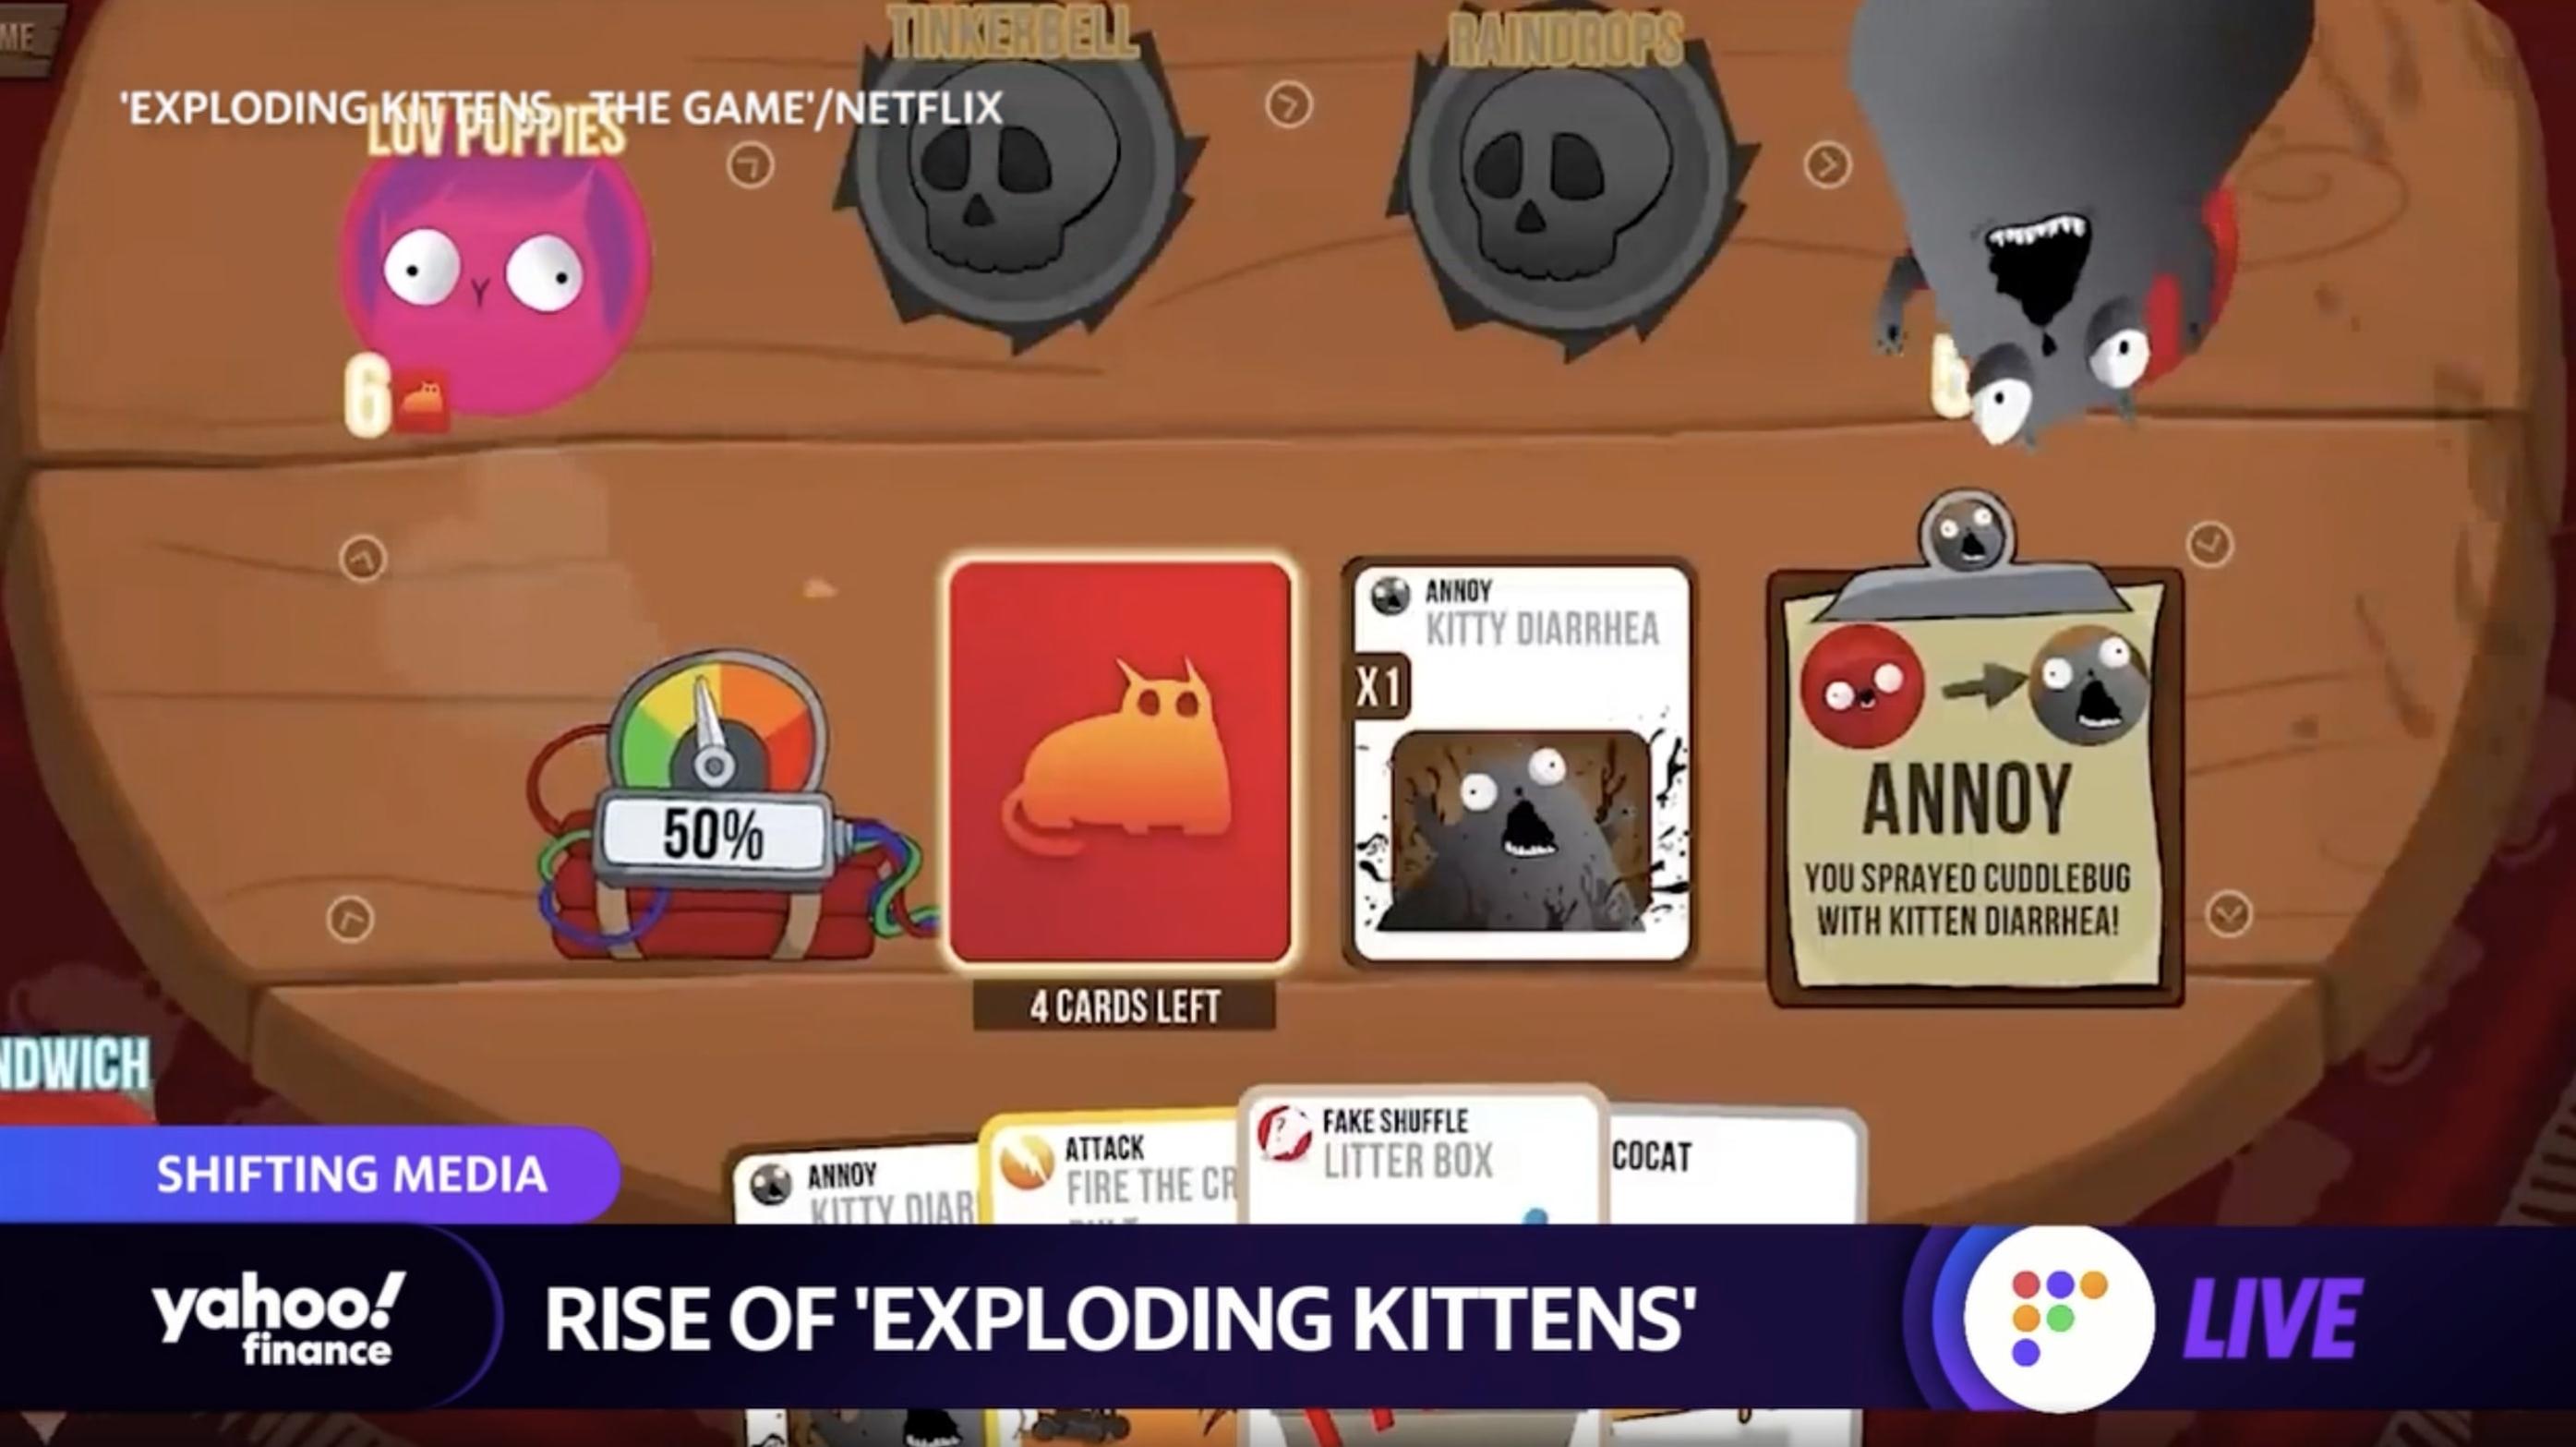 Netflix Announces 'Exploding Kittens' Mobile Game and Animated Series In  First-Of-Its-Kind Deal, Based On The Popular Card Game - About Netflix